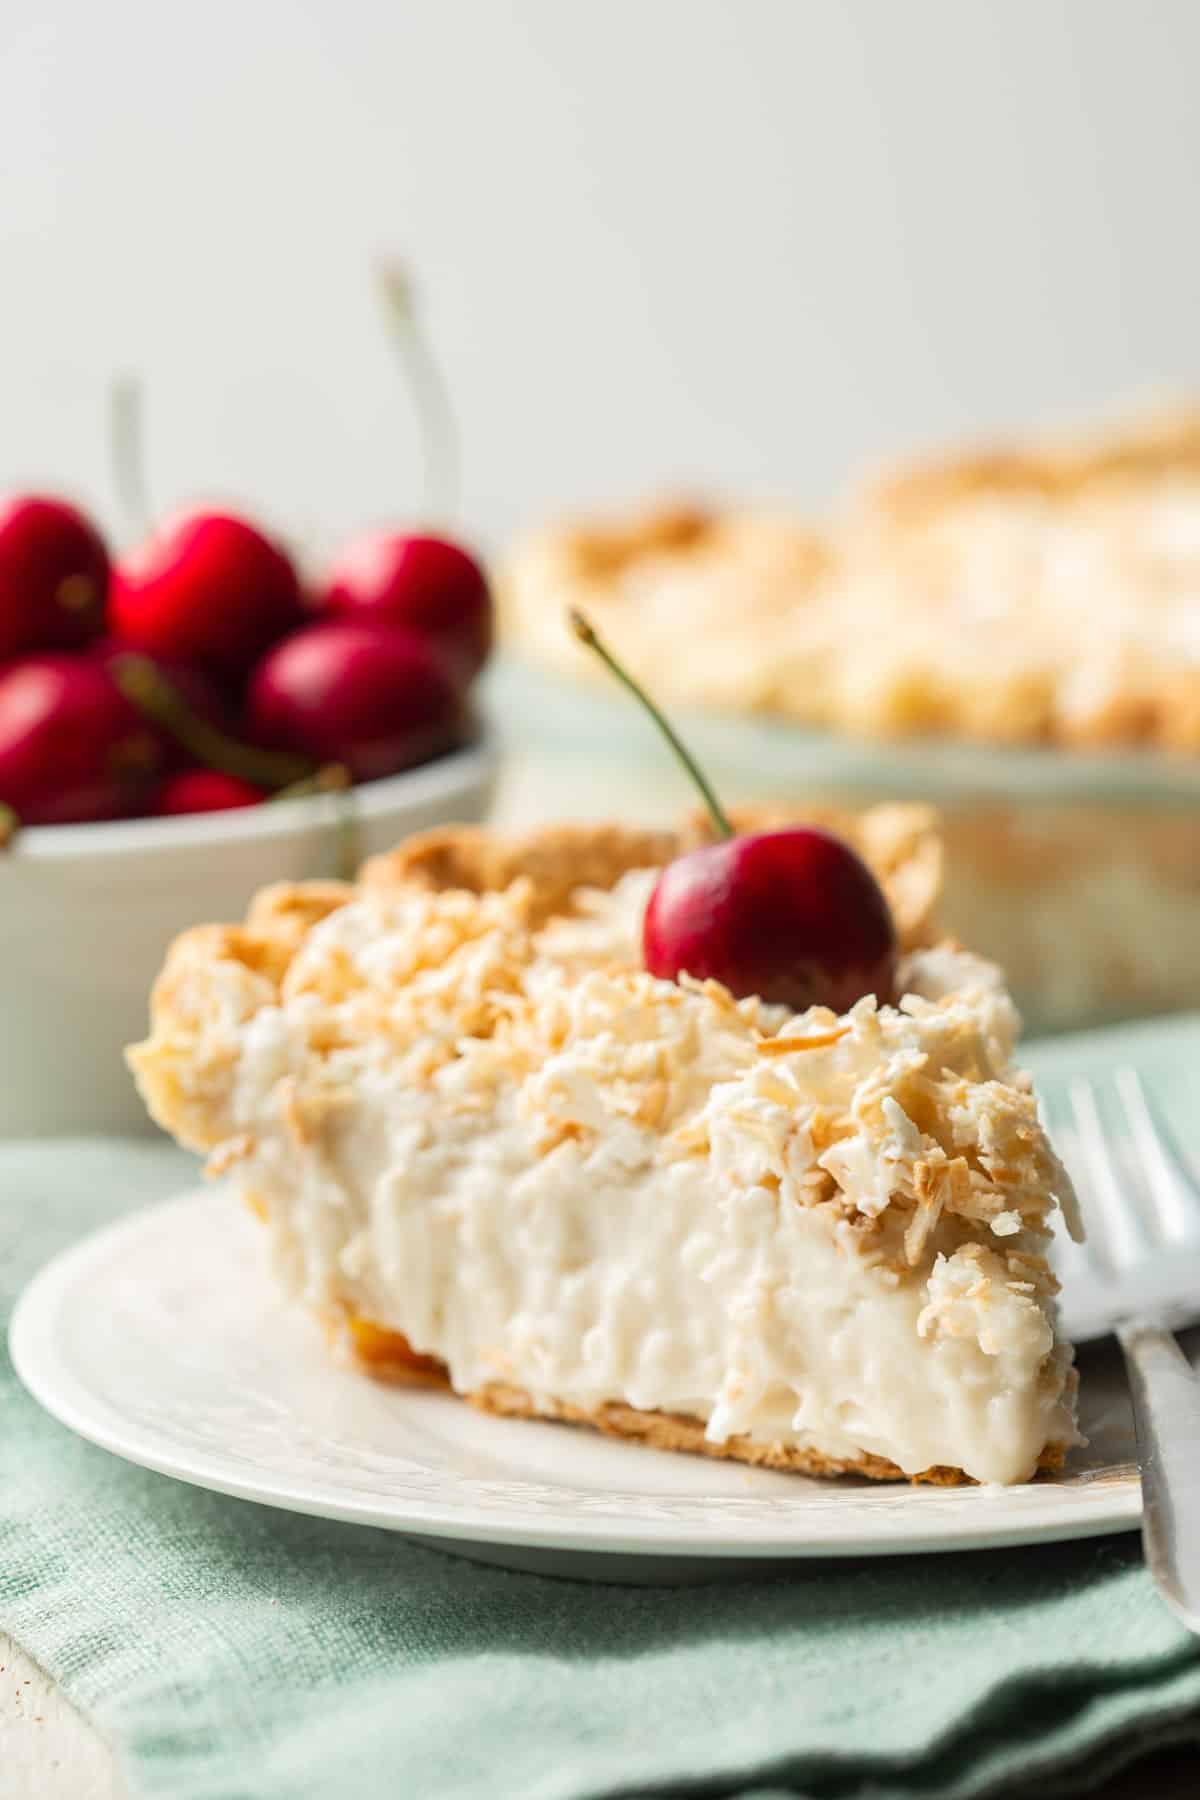 Slice of Vegan Coconut Cream Pie with bowl of cherries and pie in the background.